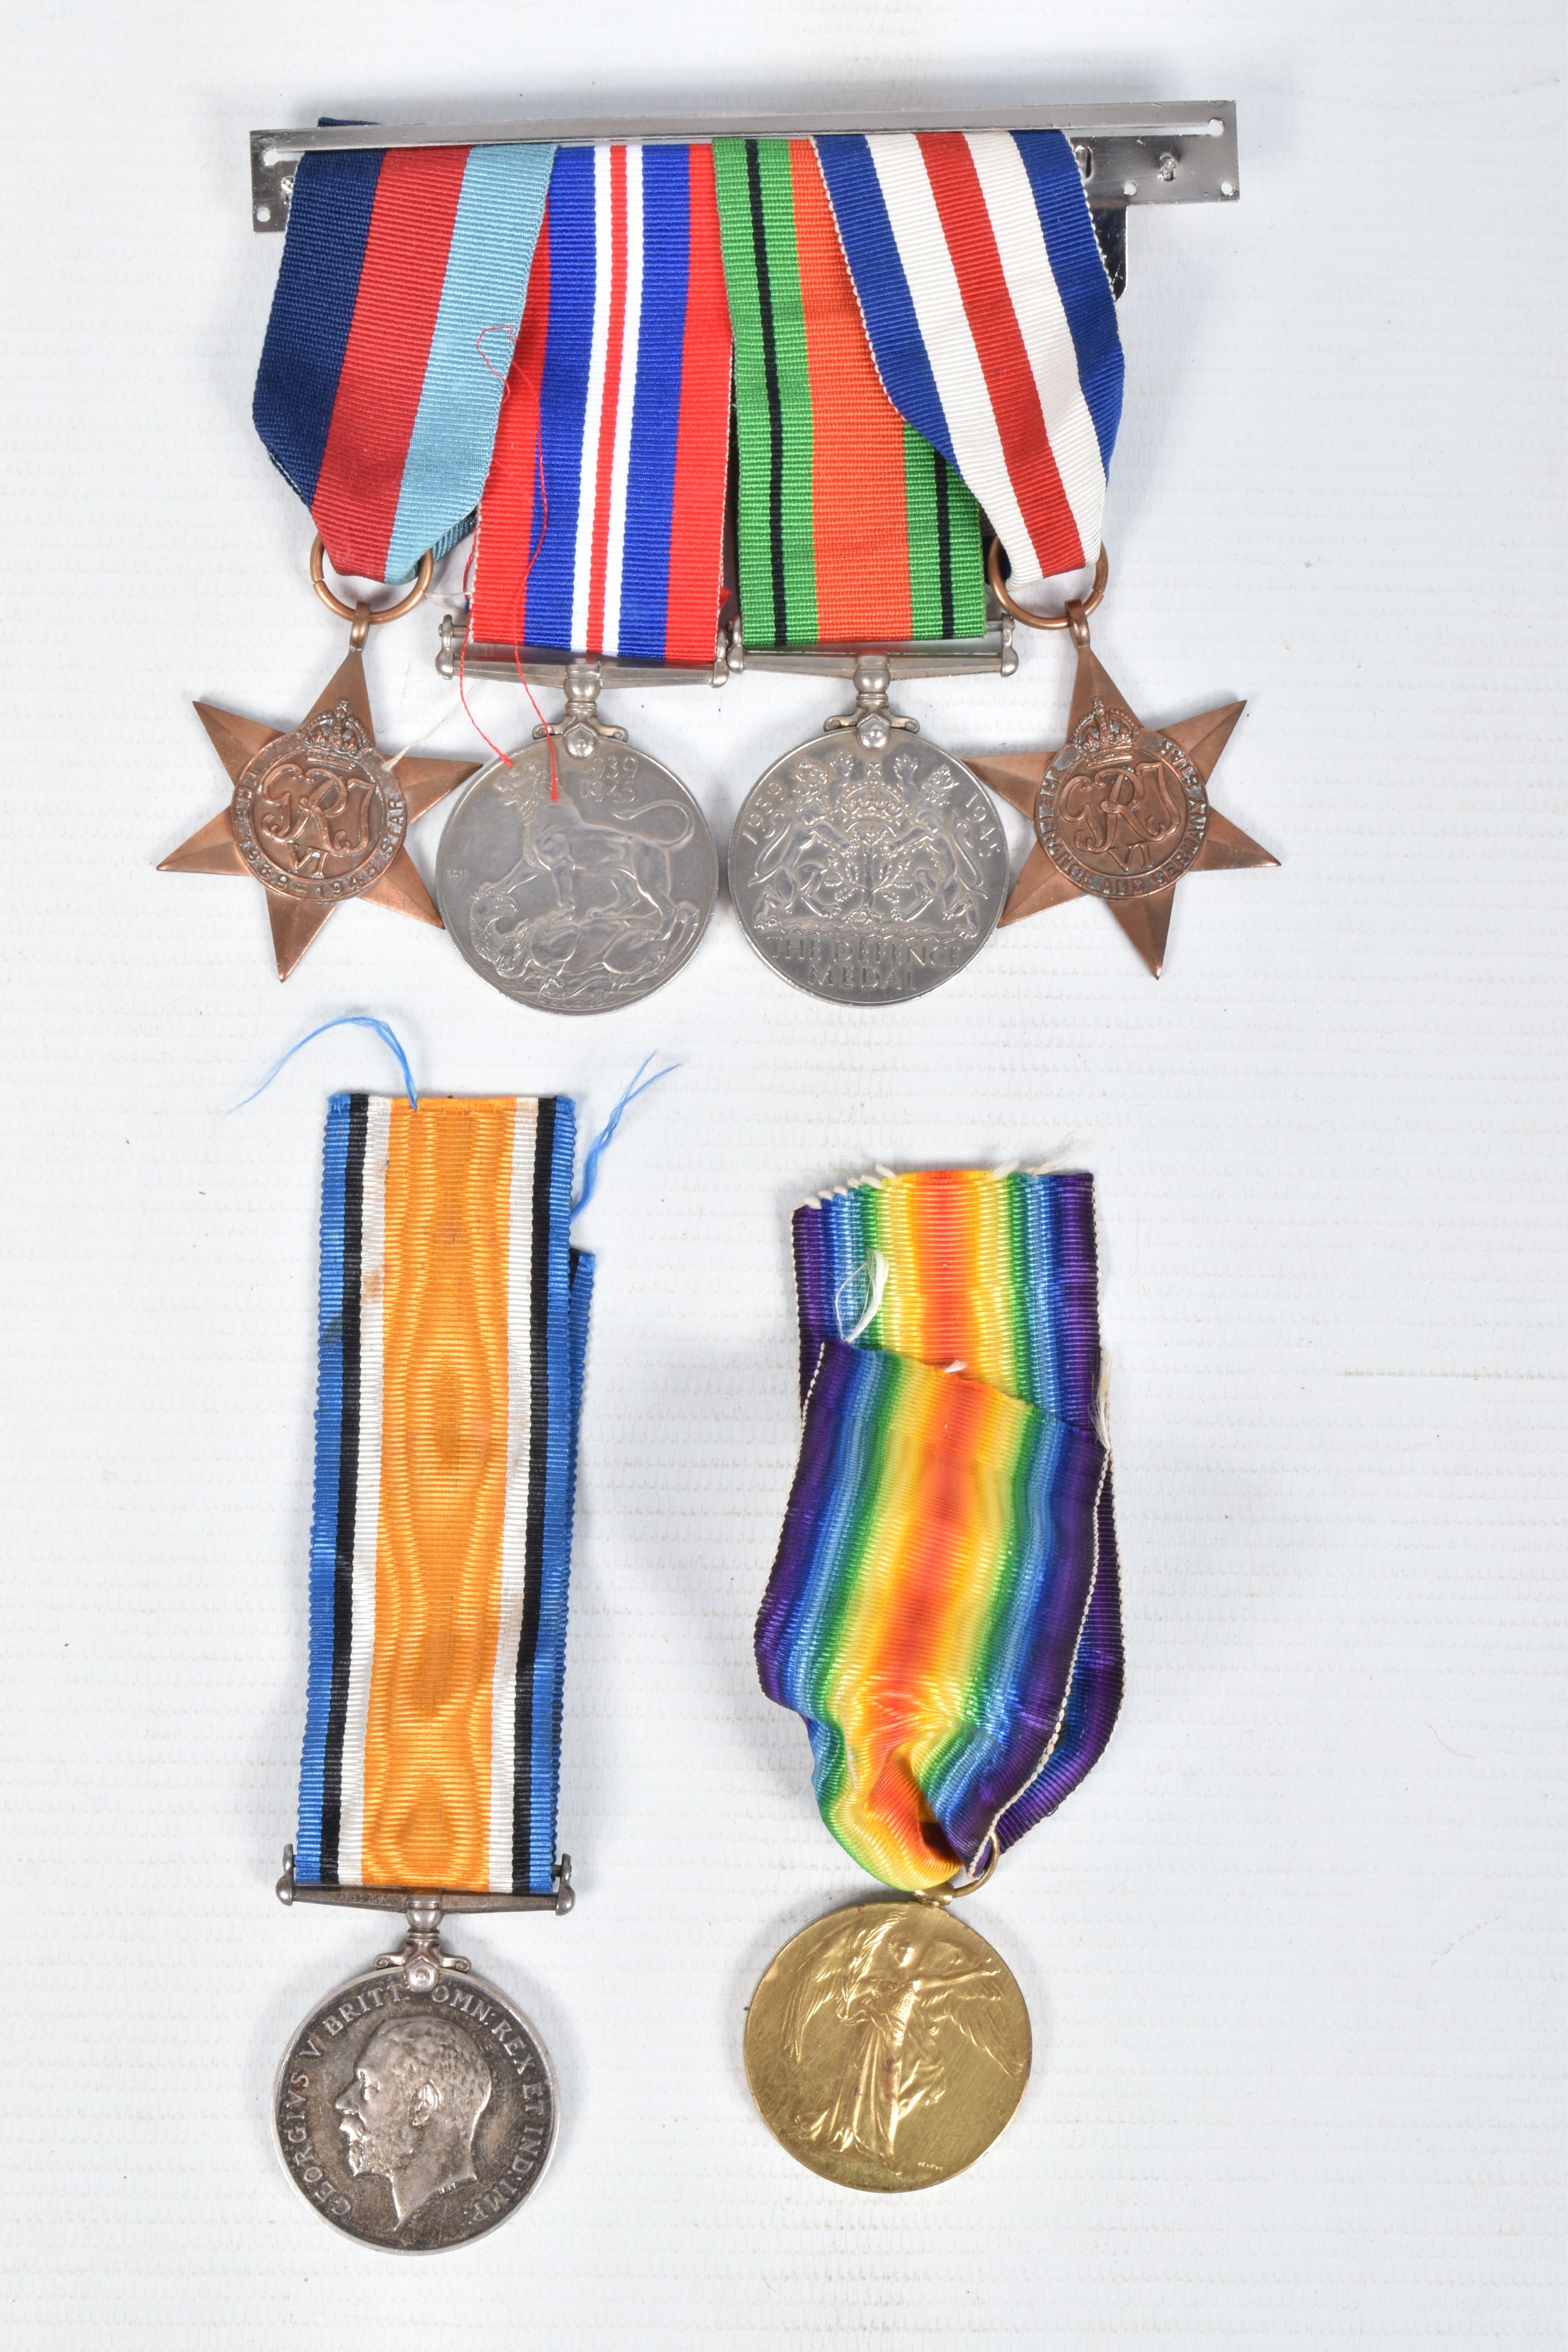 A PAIR OF WWI MEDALS AND FOUR WWII MEDALS, the WWI medals are correctly named to private 99551 Afred